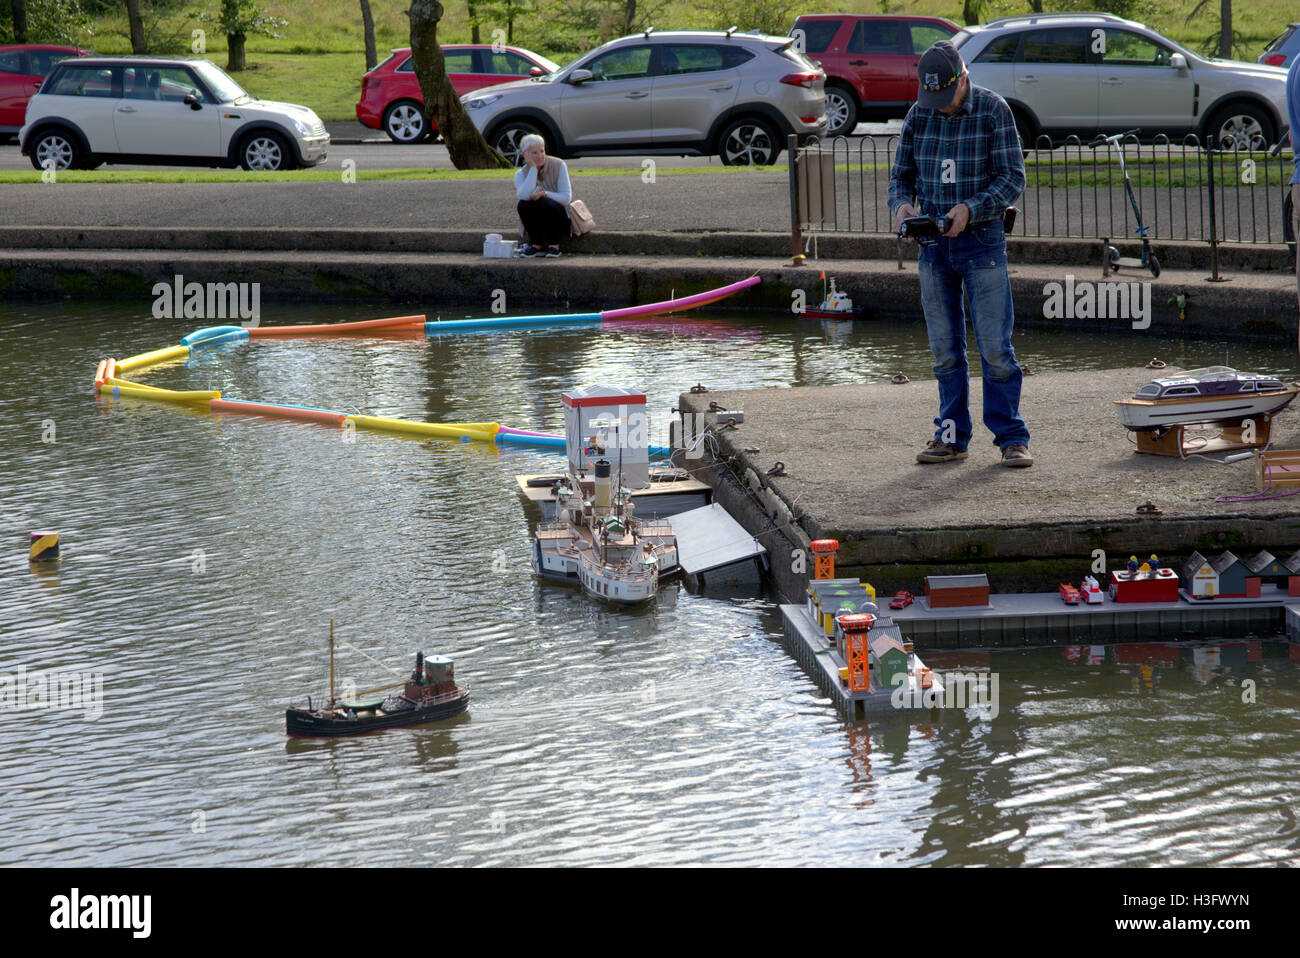 Model boat display including trawler  toy docks and sailboat during local celebrations at open day at Knightswood Park. Stock Photo